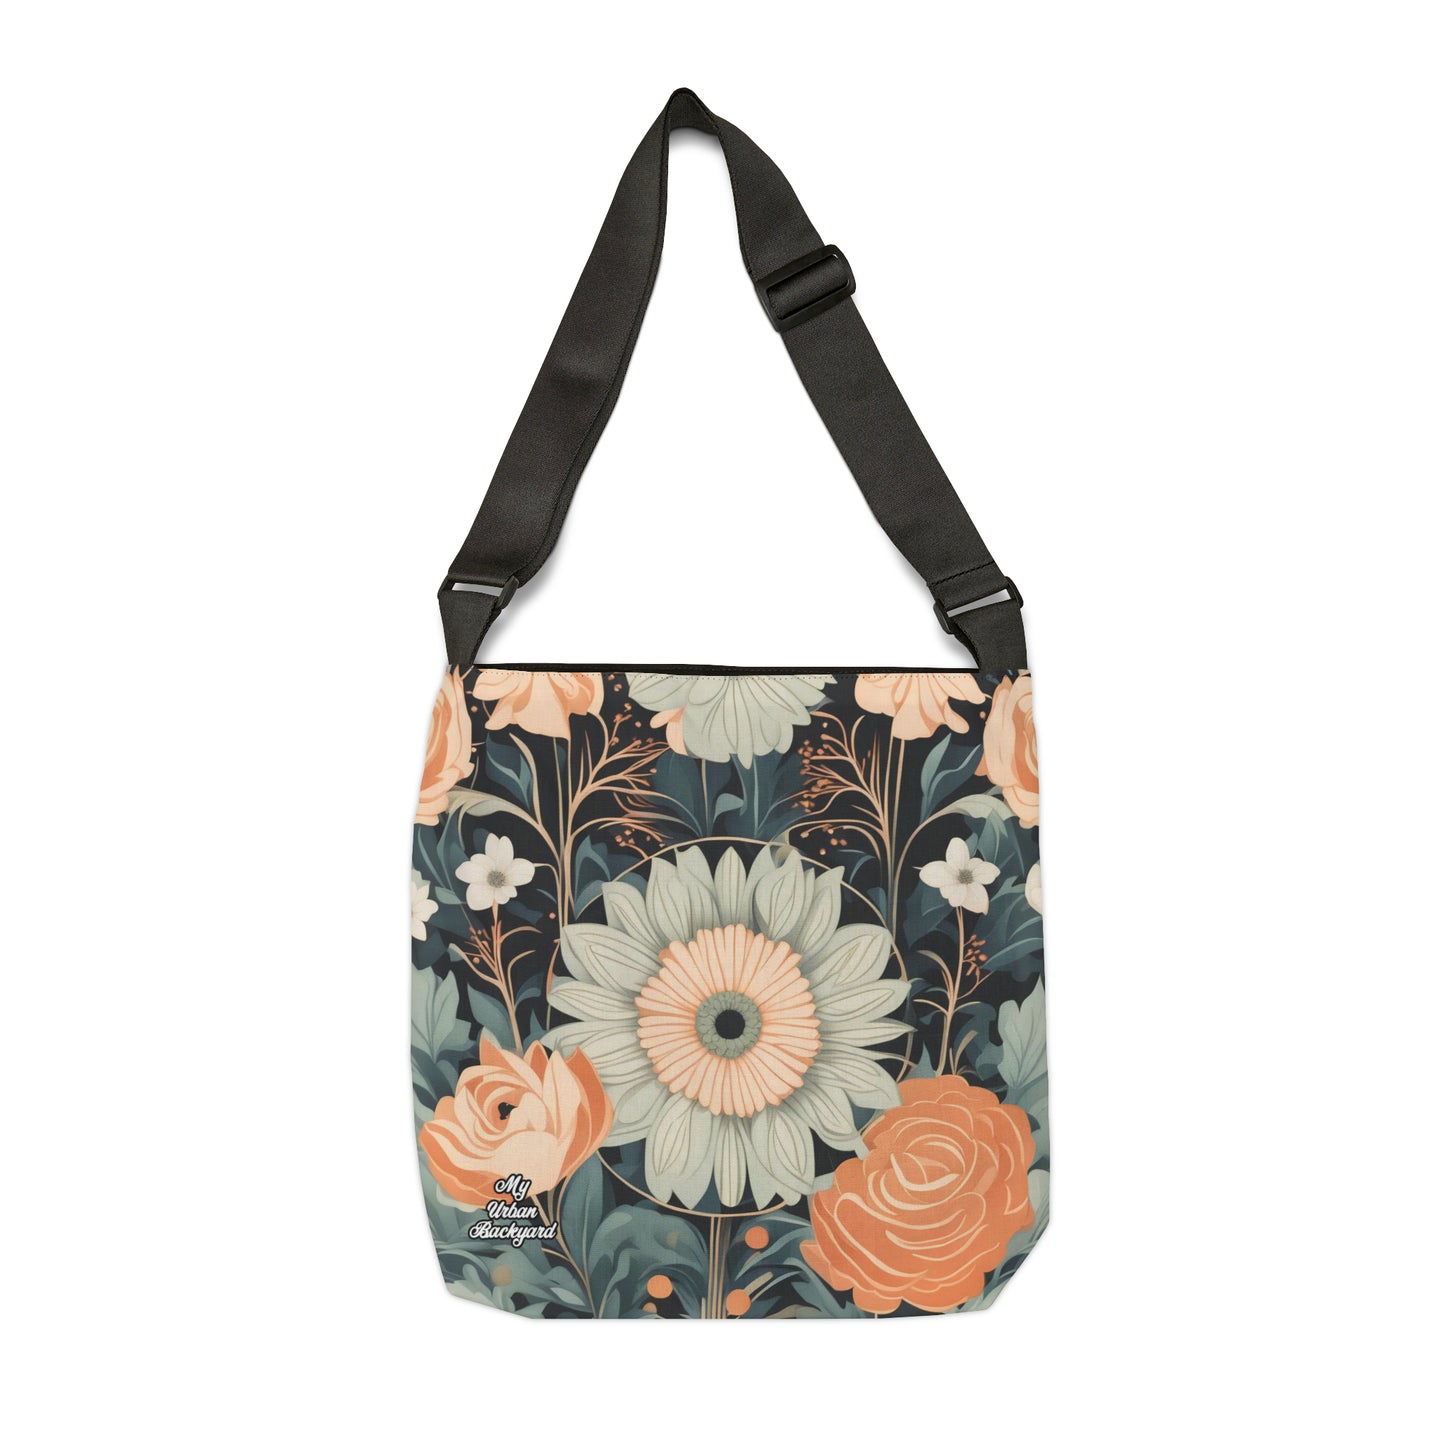 Wildflowers, Tote Bag with Adjustable Strap - Trendy and Versatile